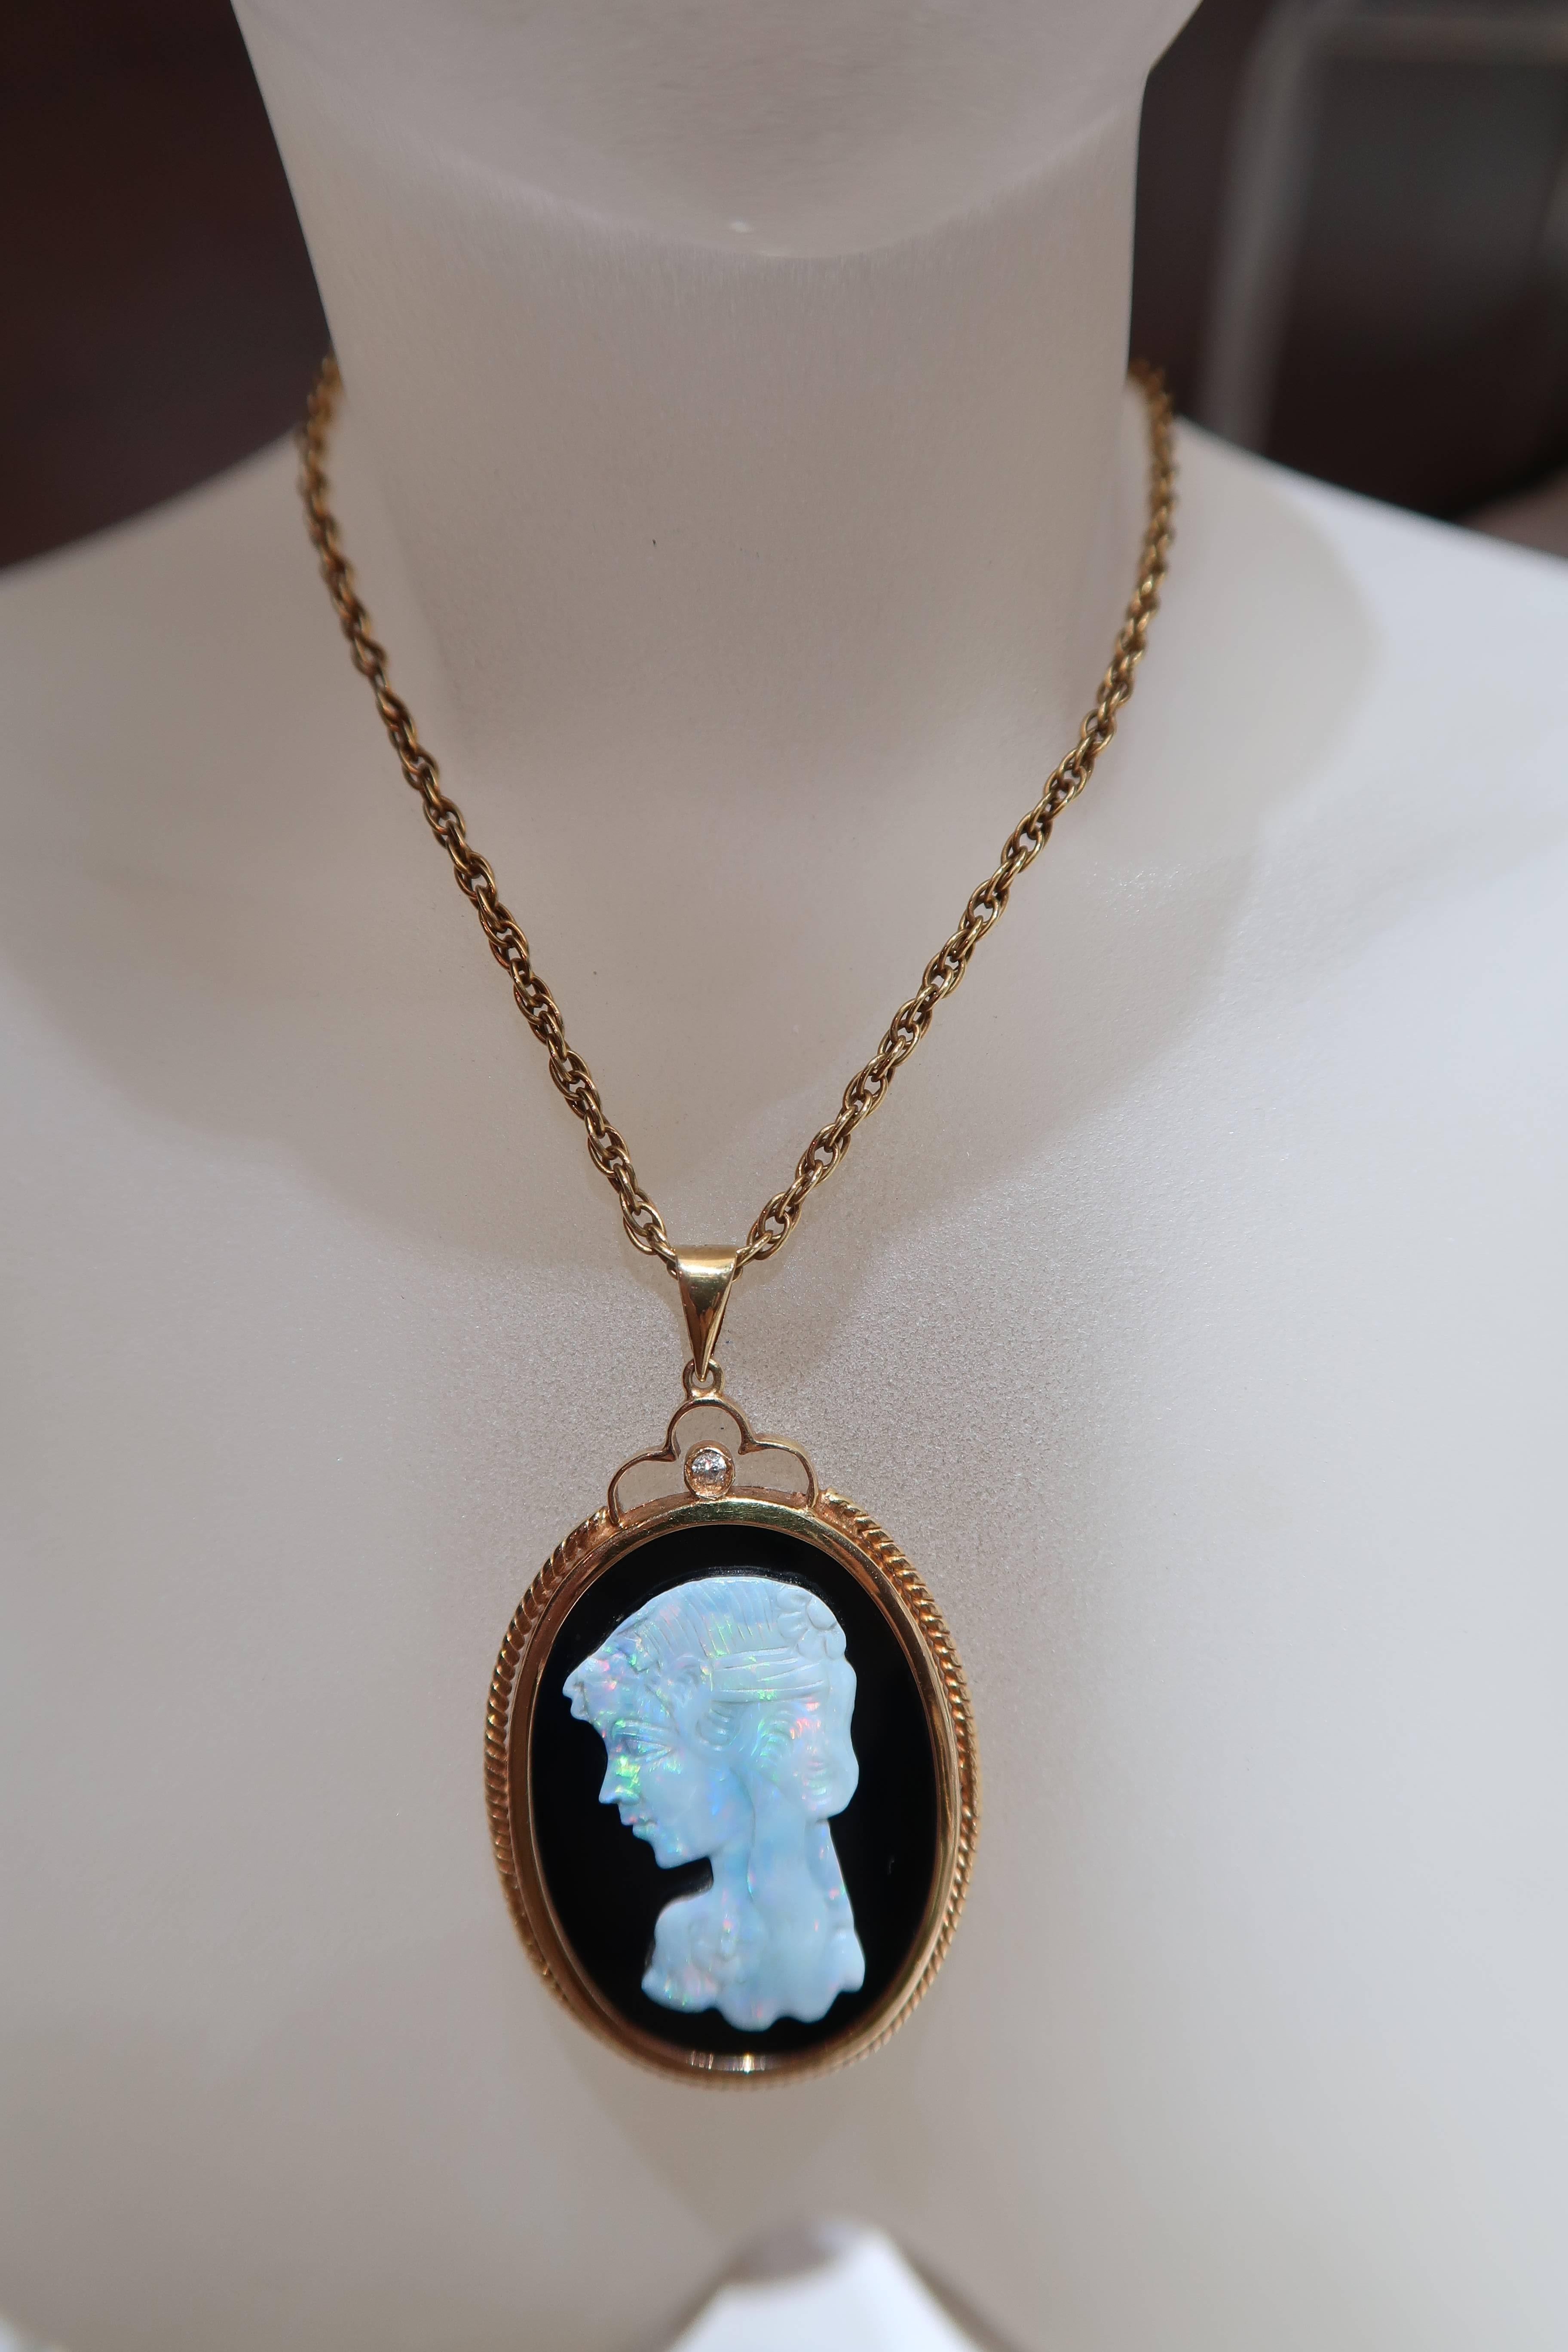 Fine carved opal cameo pendant with onyx in 14K yellow gold and 18K yellow gold rope chain.

14K Onyx and Opal Cameo Pendant
Gold : 14K Yellow Gold
Diamond : 1 piece
Opal : 1 piece
Onyx : 1 piece

18K Rope Chain
Gold : 6.088g. 18K Yellow Gold